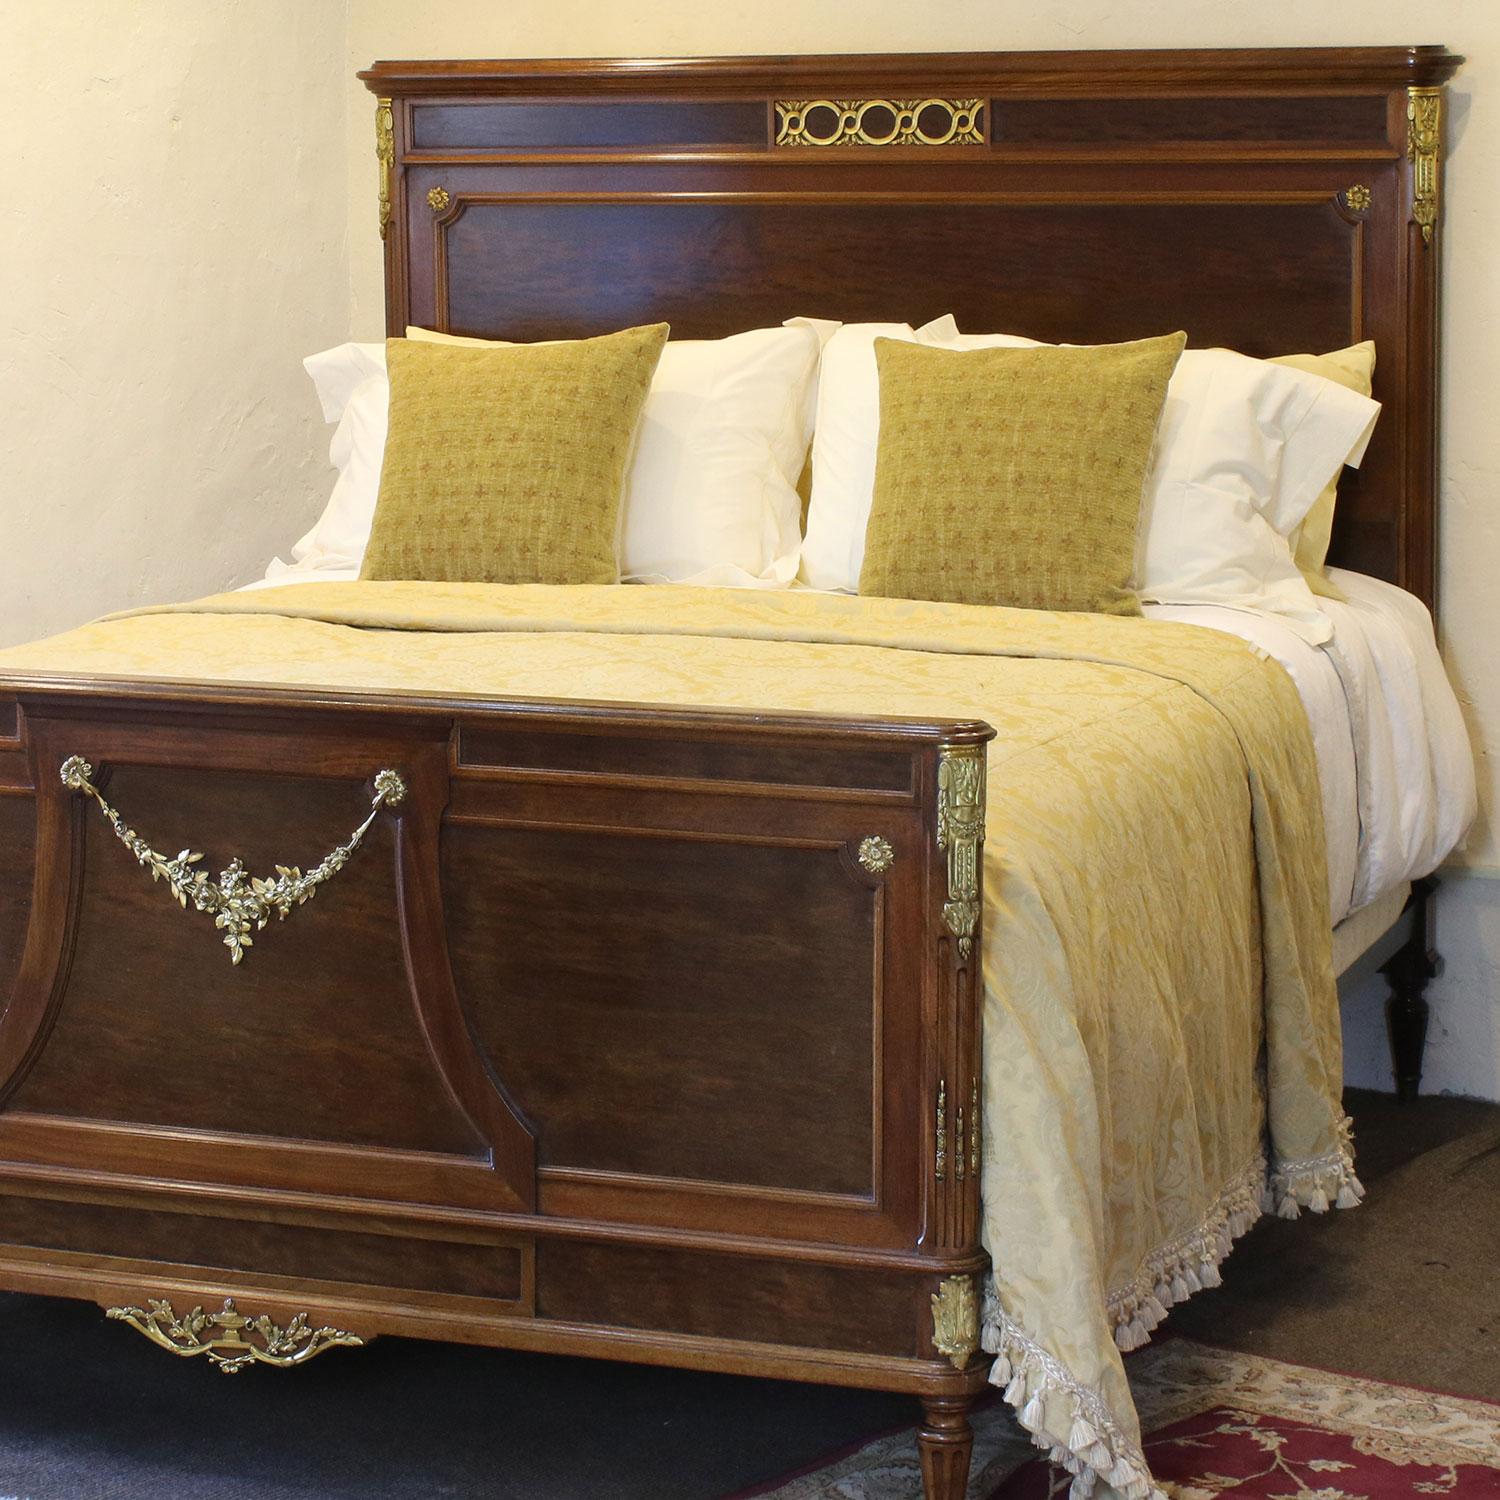 Magnificent mahogany bed from the early 20th century with ormolu decoration. 

This bed accepts an extra wide base and mattress set (5ft 3